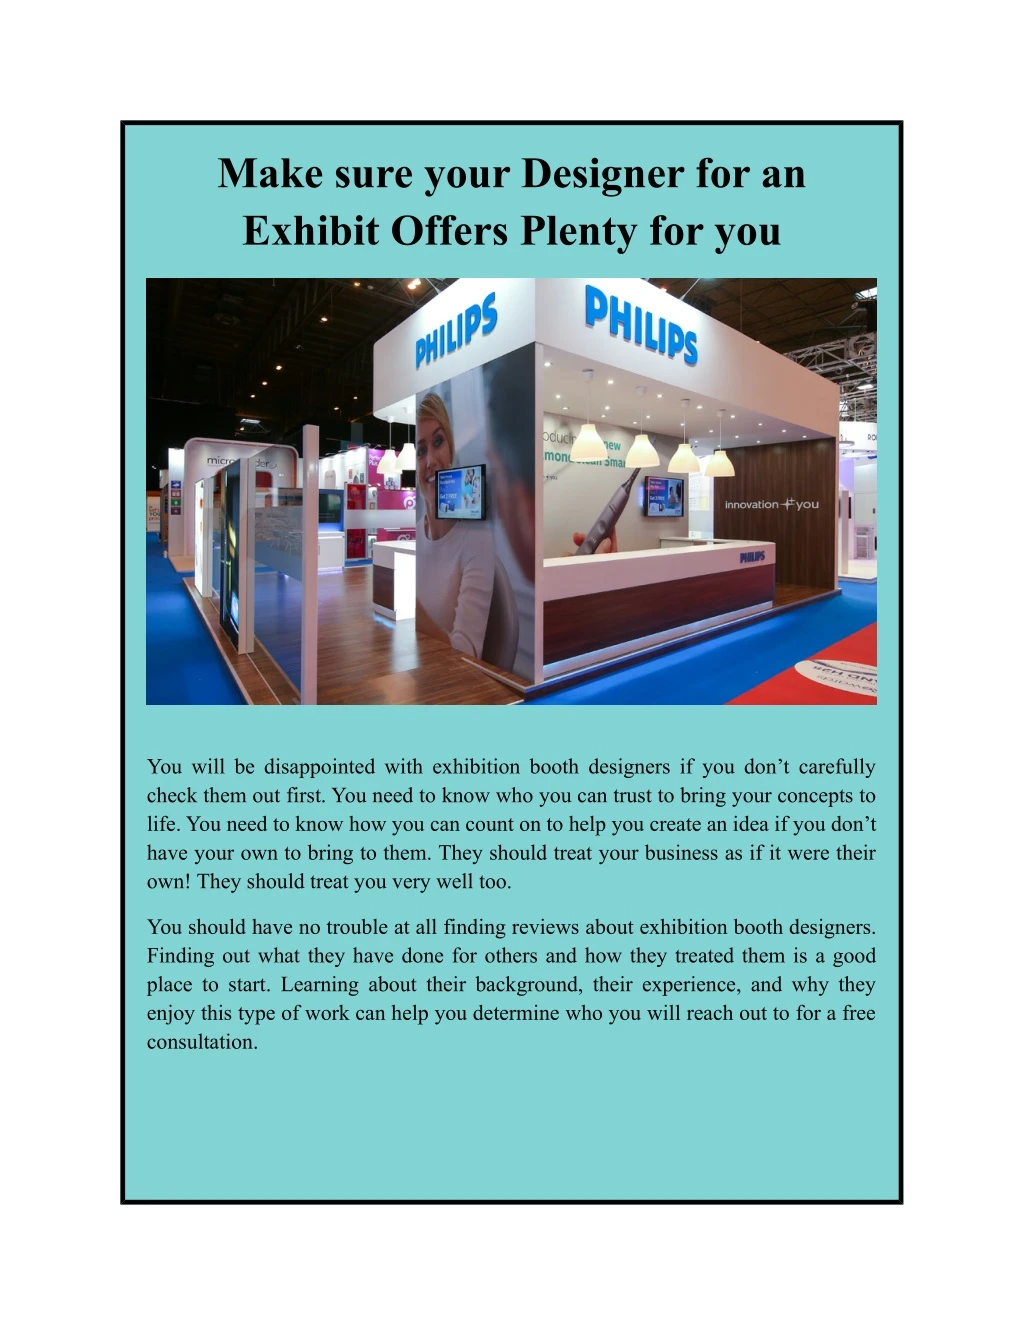 make sure your designer for an exhibit offers